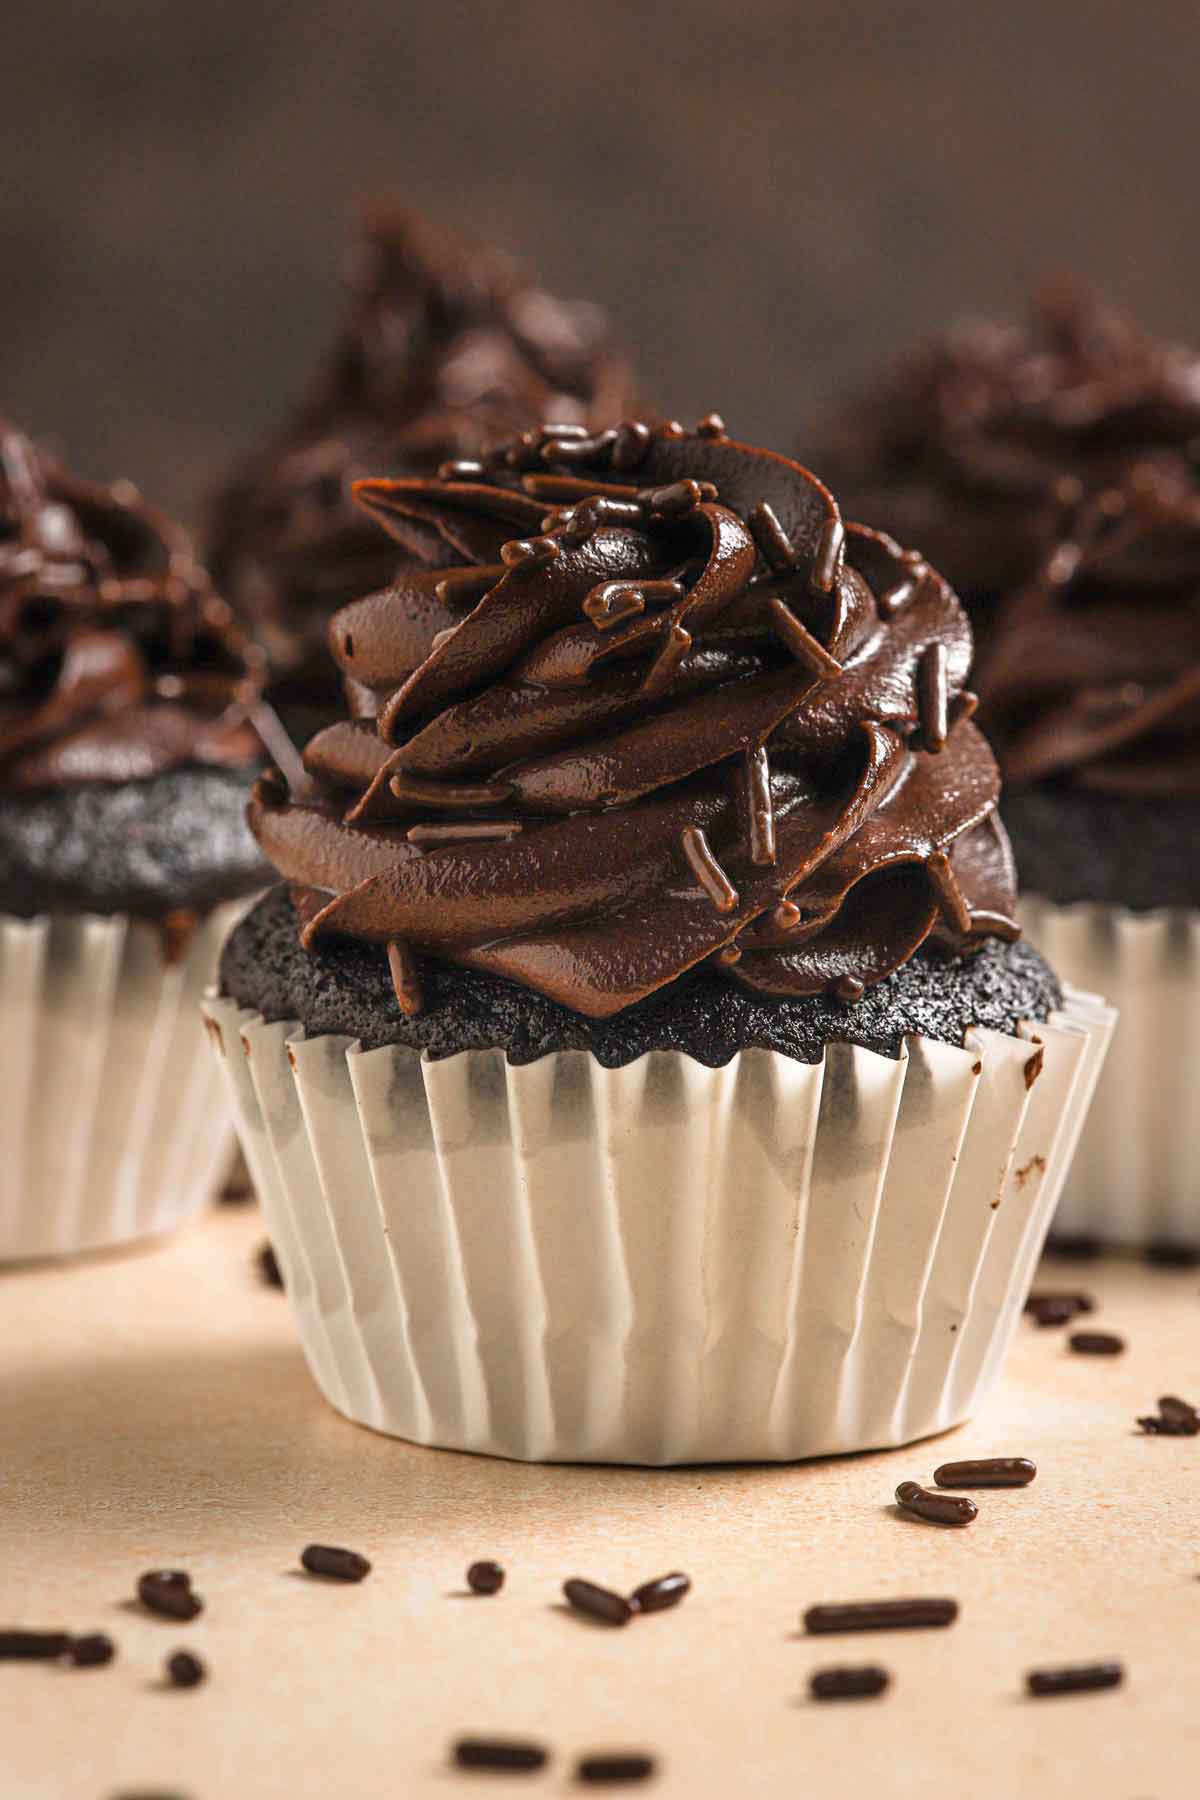 Close-up, straight-on photo of chocolate cupcake with chocolate frosting and chocolate sprinkles.